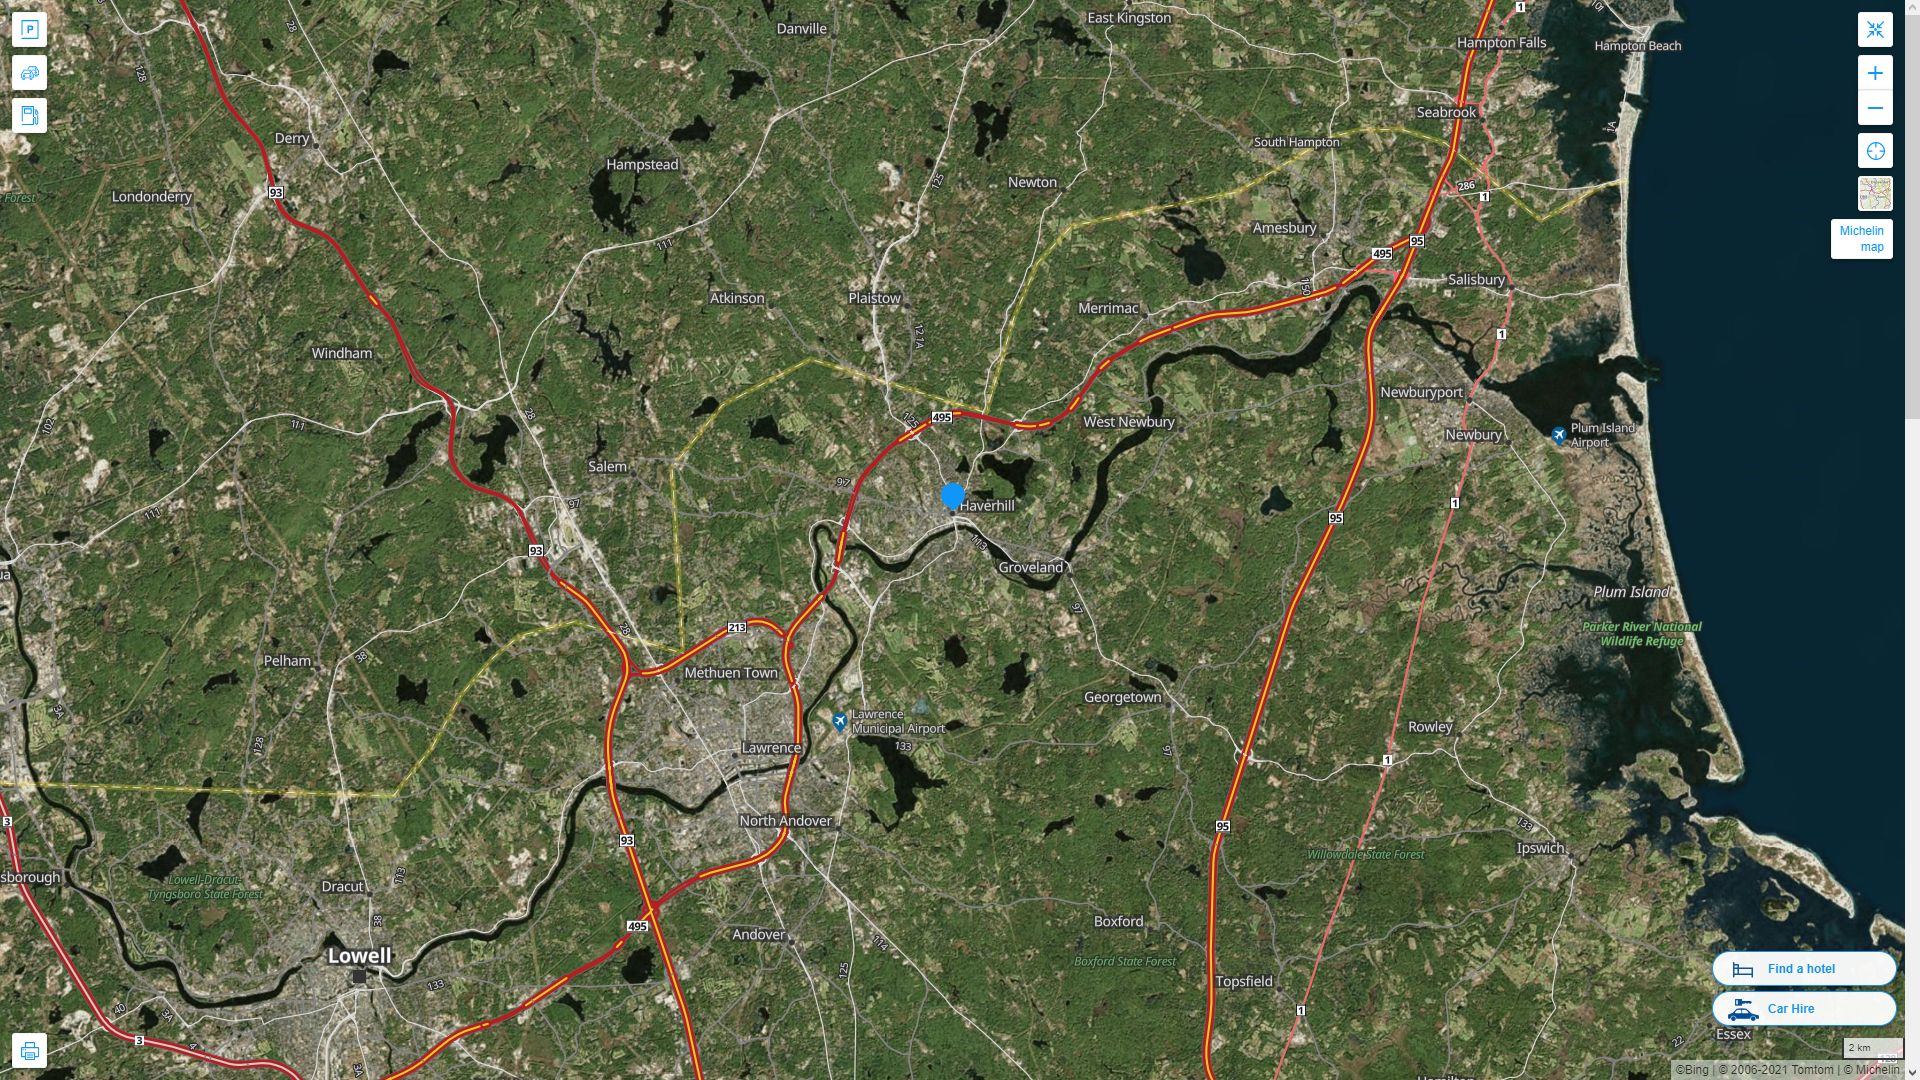 Haverhill Massachusetts Highway and Road Map with Satellite View